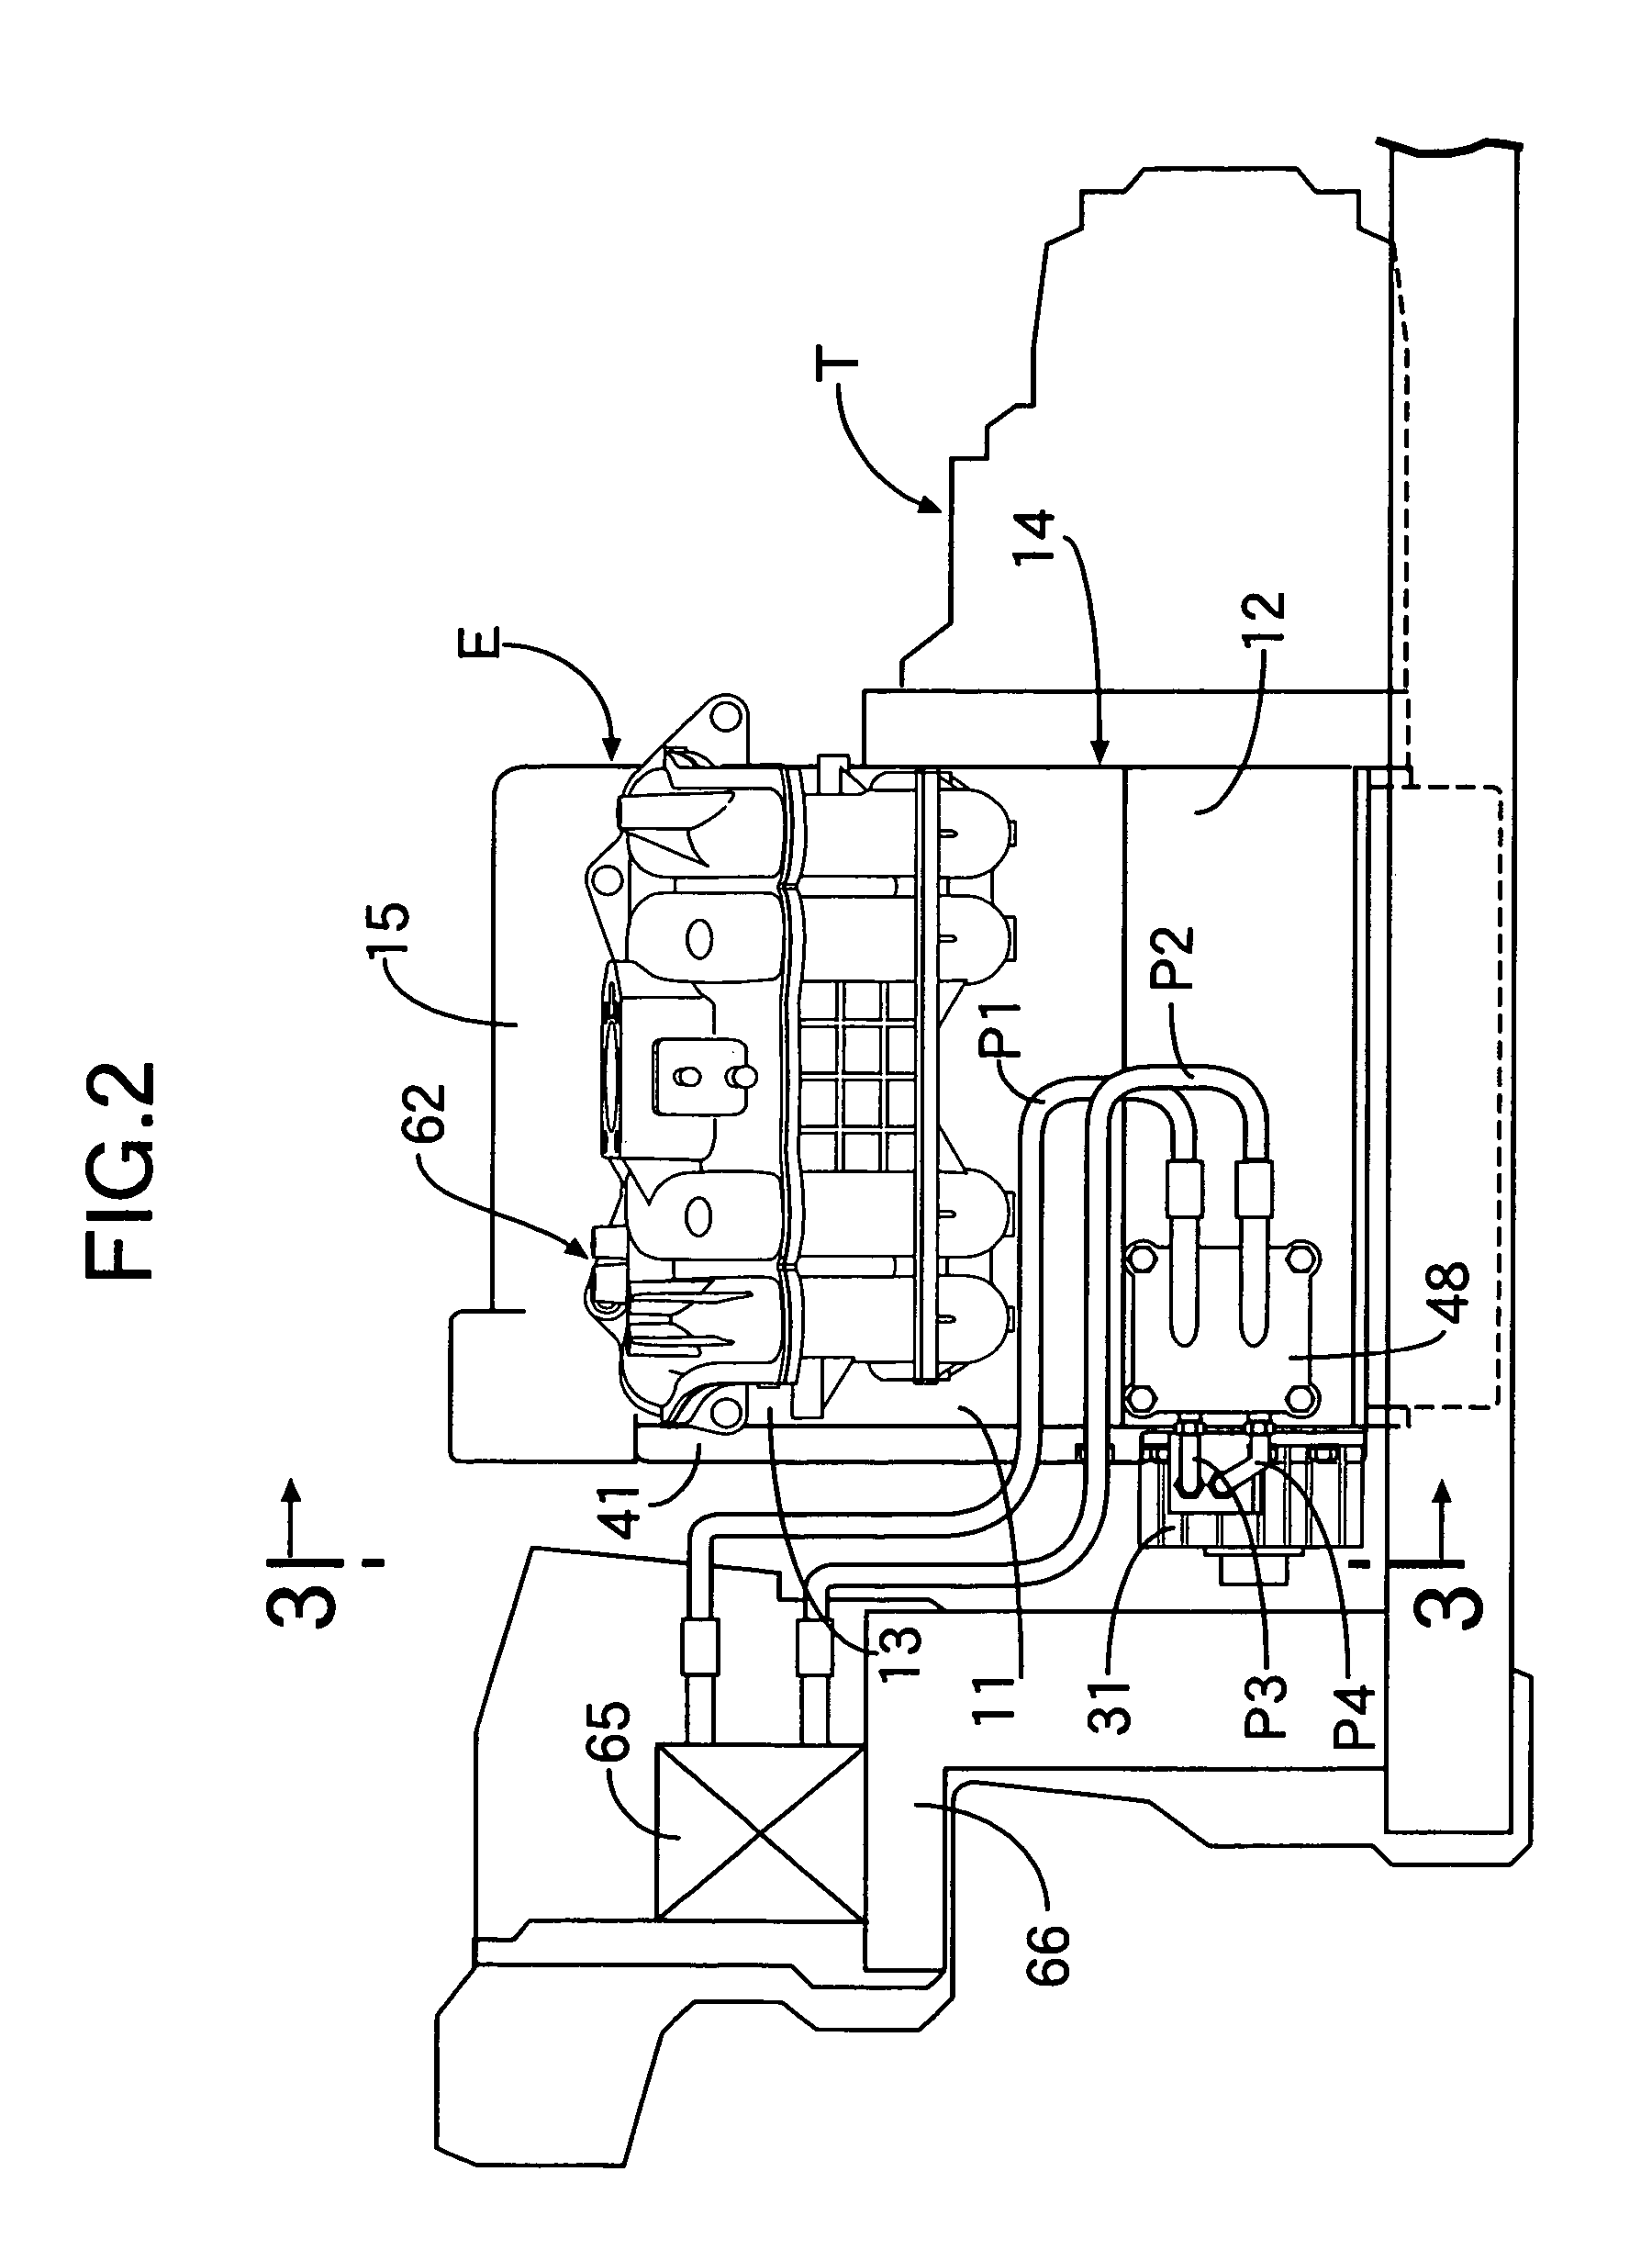 Variable stroke-characteristic engine for vehicle